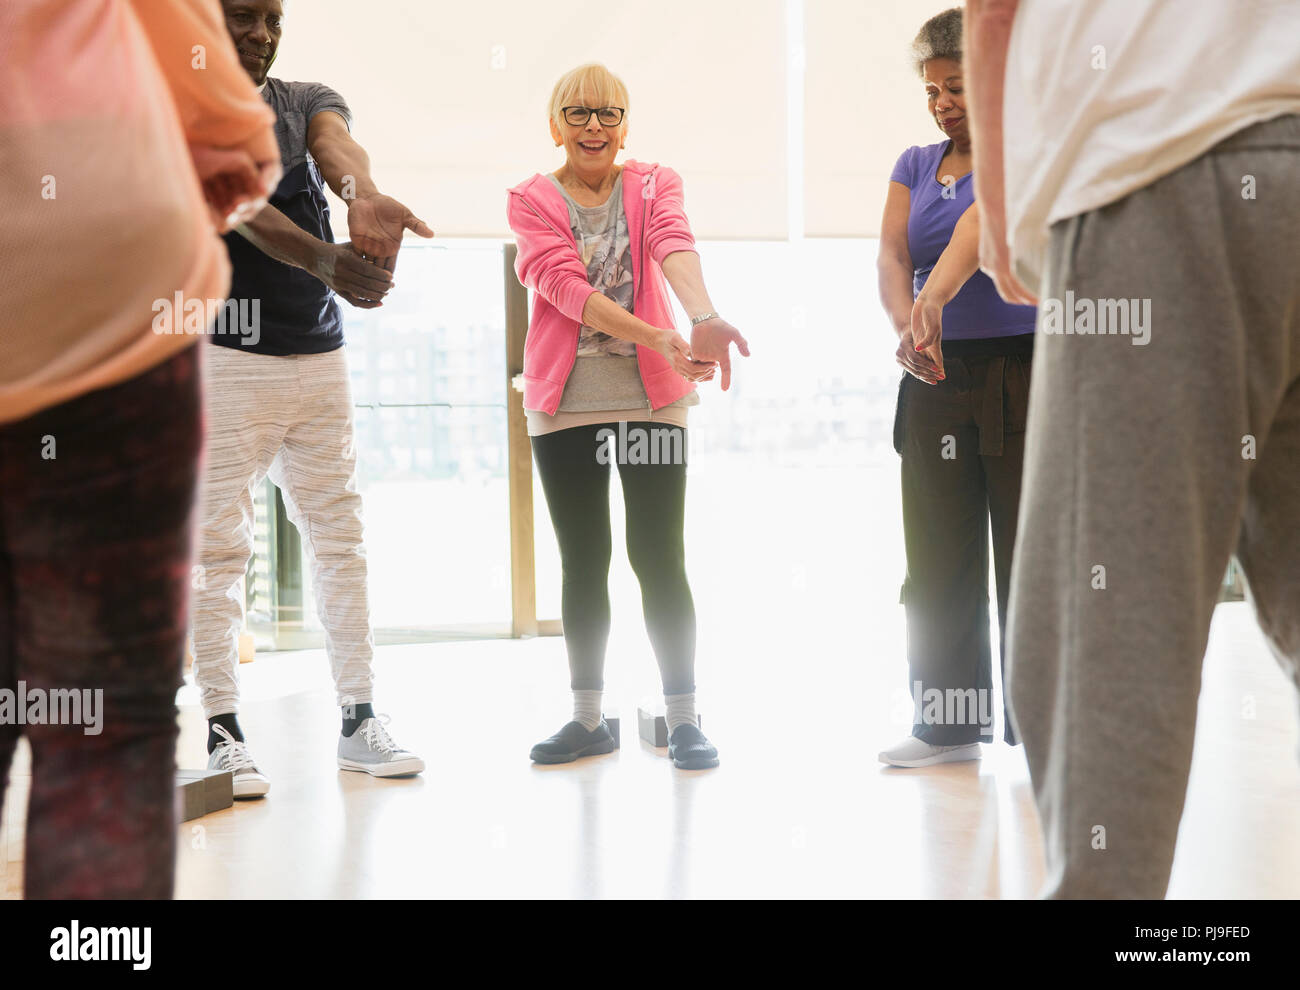 Active seniors stretching wrists in exercise class Stock Photo